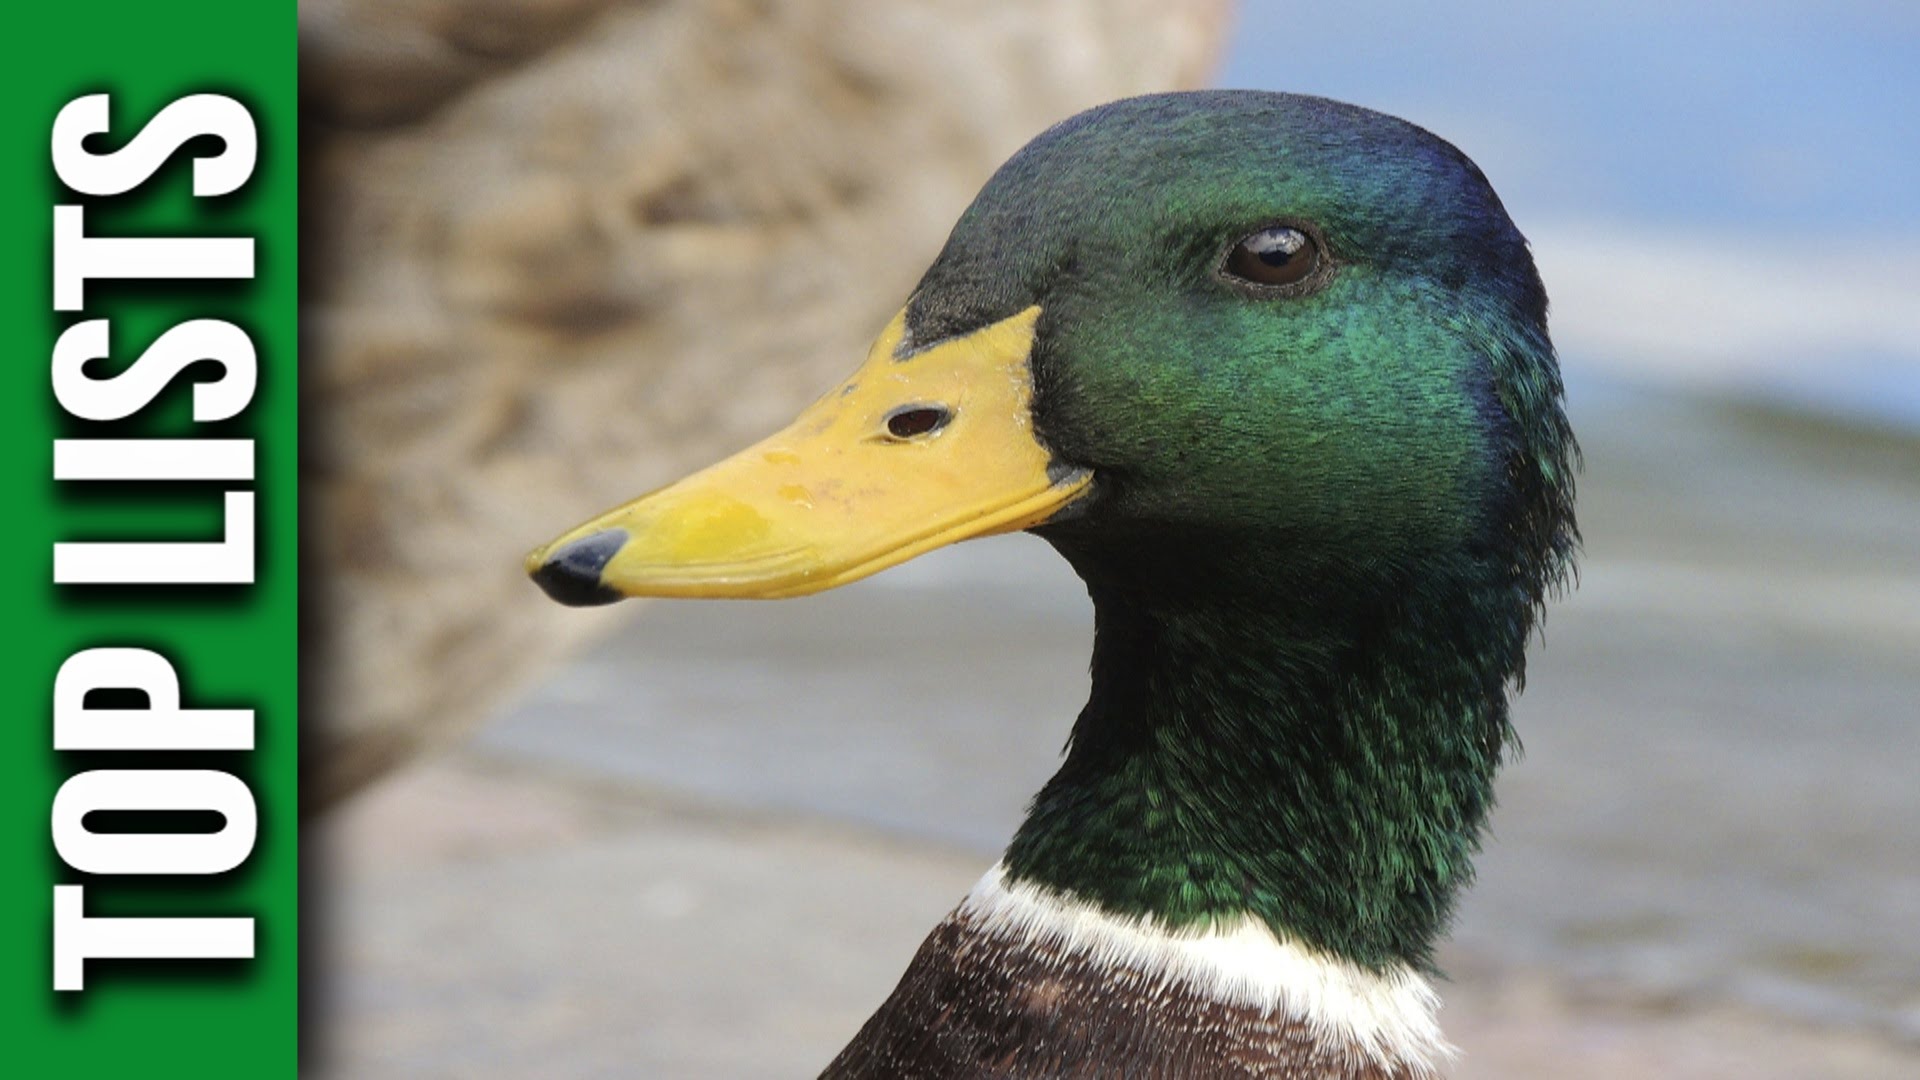 10 Interesting Facts About Ducks - YouTube